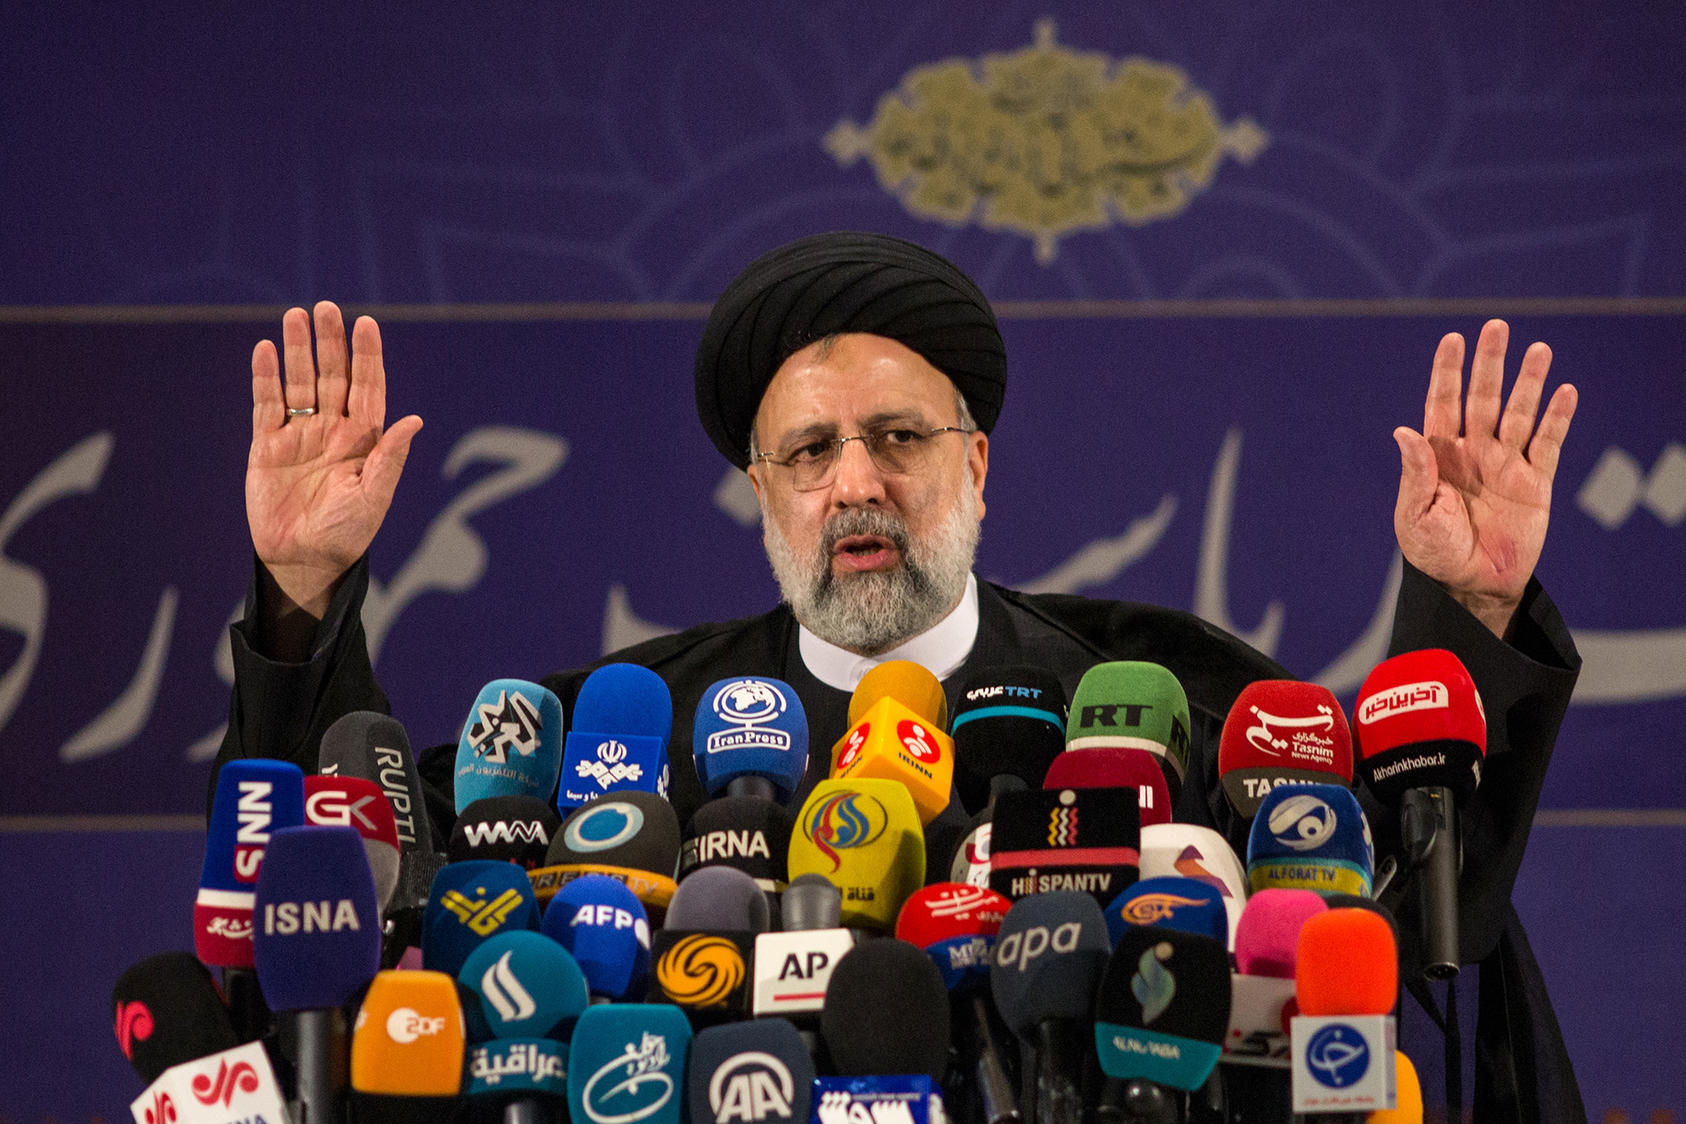 Iran’s then-judiciary chief Ebrahim Raisi speaks in Tehran on Saturday, May 15, 2021, after being registered to run in the presidential election. (Arash Khamooshi/The New York Times)